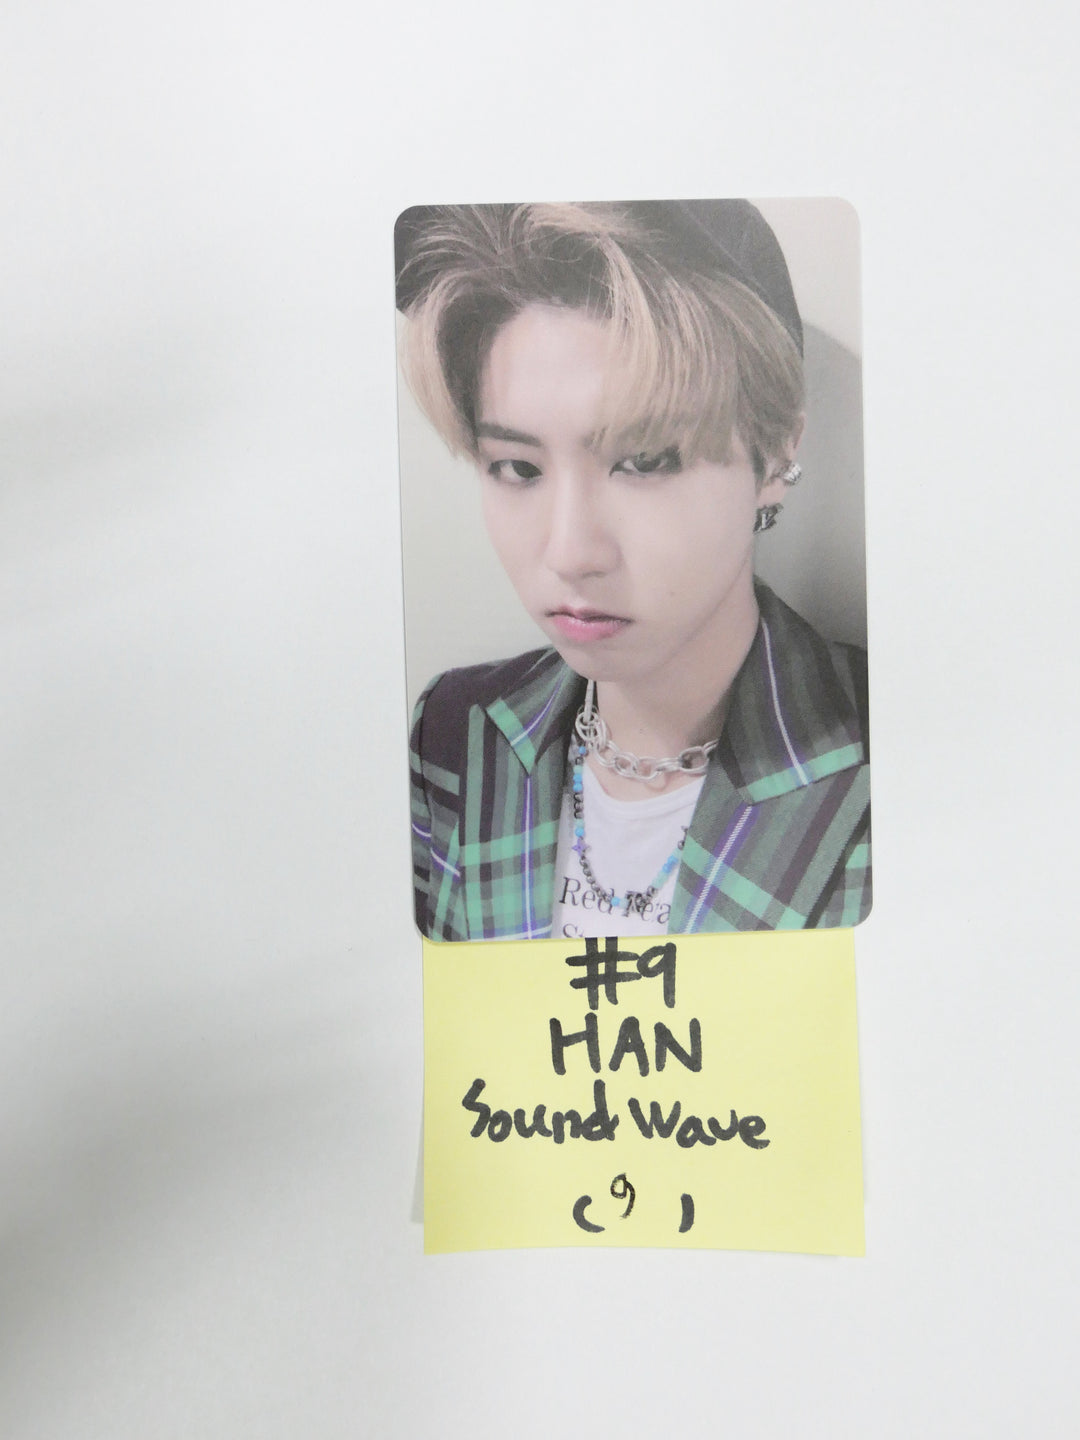 Stray Kids 'No Easy' - Soundwave Luckydraw Plastic Photocard + Bonus Message Card Round 1 (Must Read)